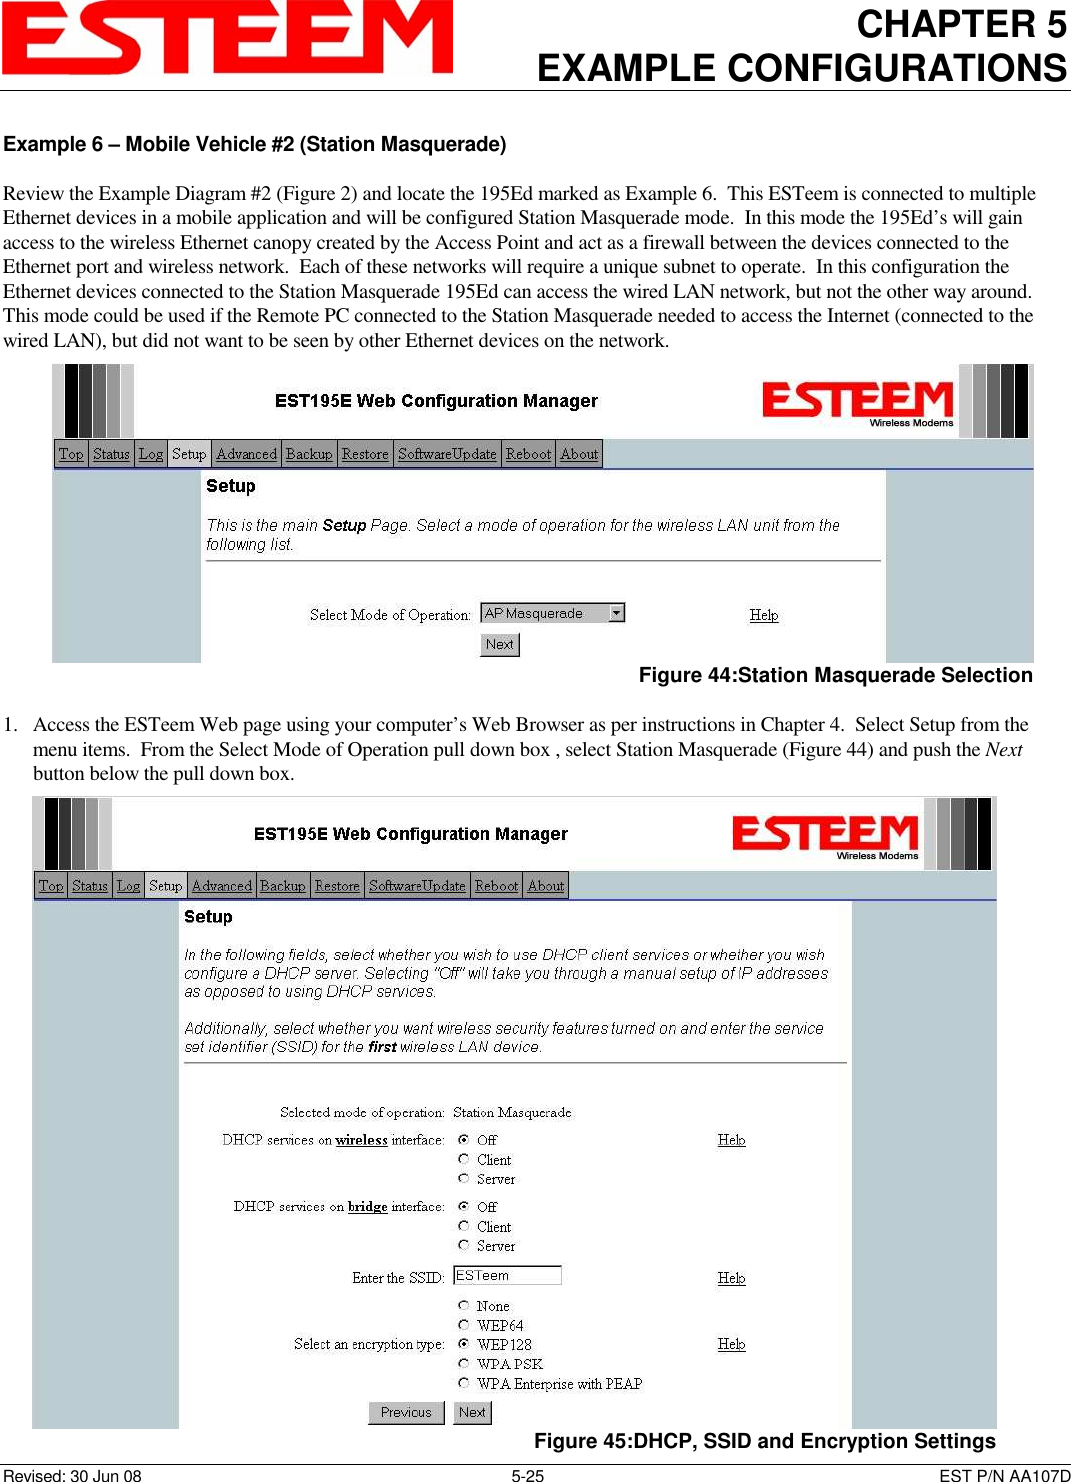 CHAPTER 5 EXAMPLE CONFIGURATIONS    Revised: 30 Jun 08  5-25  EST P/N AA107D Example 6 – Mobile Vehicle #2 (Station Masquerade)  Review the Example Diagram #2 (Figure 2) and locate the 195Ed marked as Example 6.  This ESTeem is connected to multiple Ethernet devices in a mobile application and will be configured Station Masquerade mode.  In this mode the 195Ed’s will gain access to the wireless Ethernet canopy created by the Access Point and act as a firewall between the devices connected to the Ethernet port and wireless network.  Each of these networks will require a unique subnet to operate.  In this configuration the Ethernet devices connected to the Station Masquerade 195Ed can access the wired LAN network, but not the other way around.  This mode could be used if the Remote PC connected to the Station Masquerade needed to access the Internet (connected to the wired LAN), but did not want to be seen by other Ethernet devices on the network.   1. Access the ESTeem Web page using your computer’s Web Browser as per instructions in Chapter 4.  Select Setup from the menu items.  From the Select Mode of Operation pull down box , select Station Masquerade (Figure 44) and push the Next button below the pull down box.    Figure 44:Station Masquerade Selection  Figure 45:DHCP, SSID and Encryption Settings 